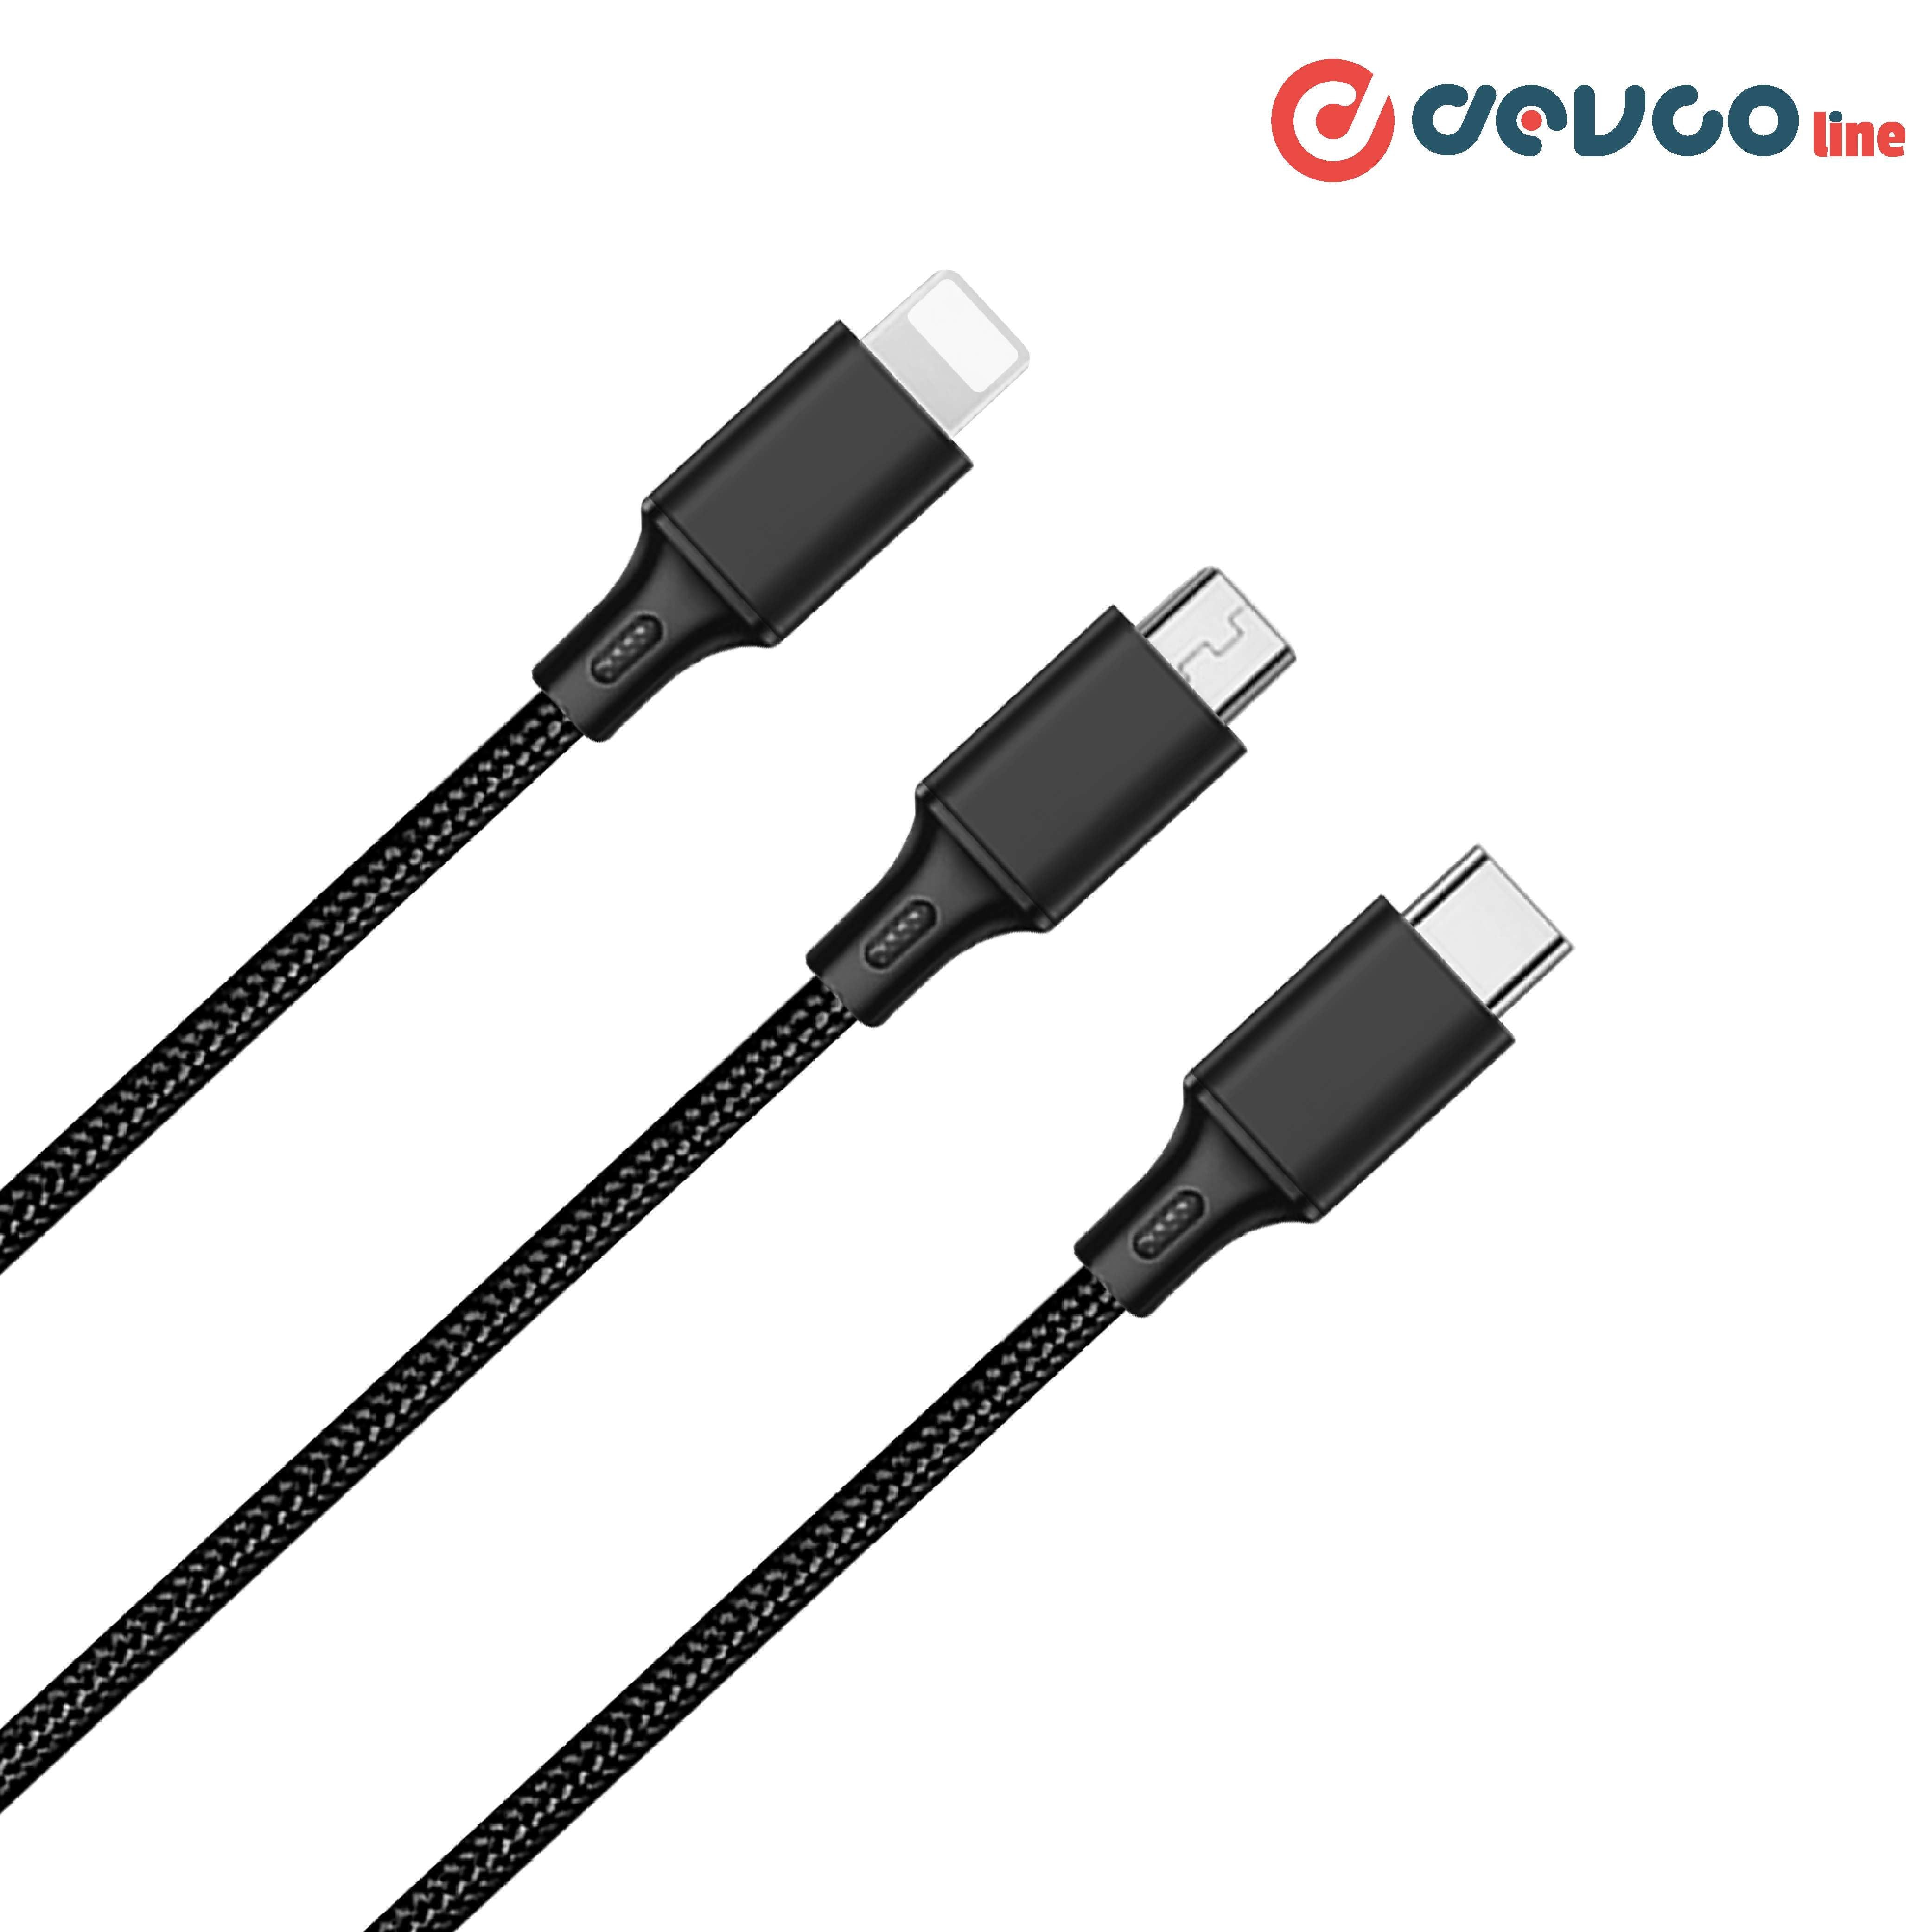 3 in 1 magnetic charging cable multi cable - DEVCOline - AT CR 3IN1